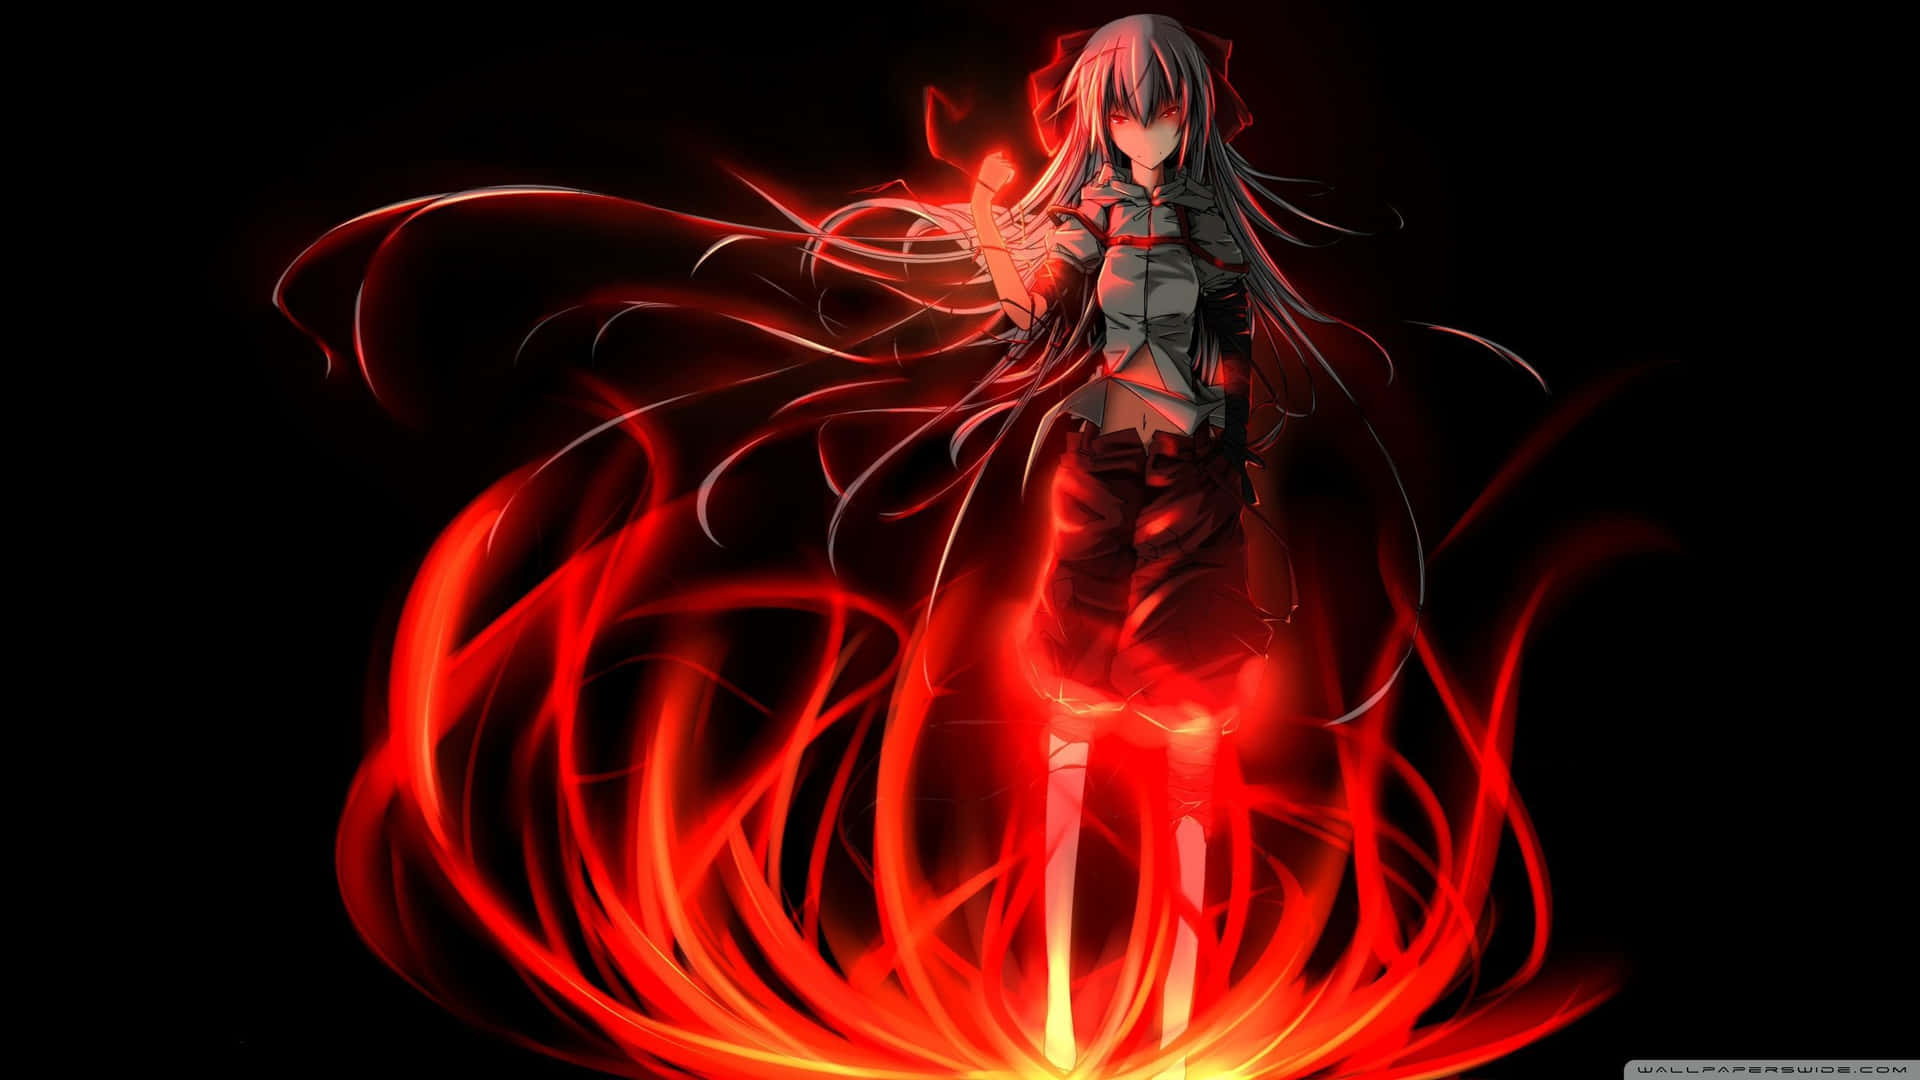 Red And Black Anime Flames Wallpaper